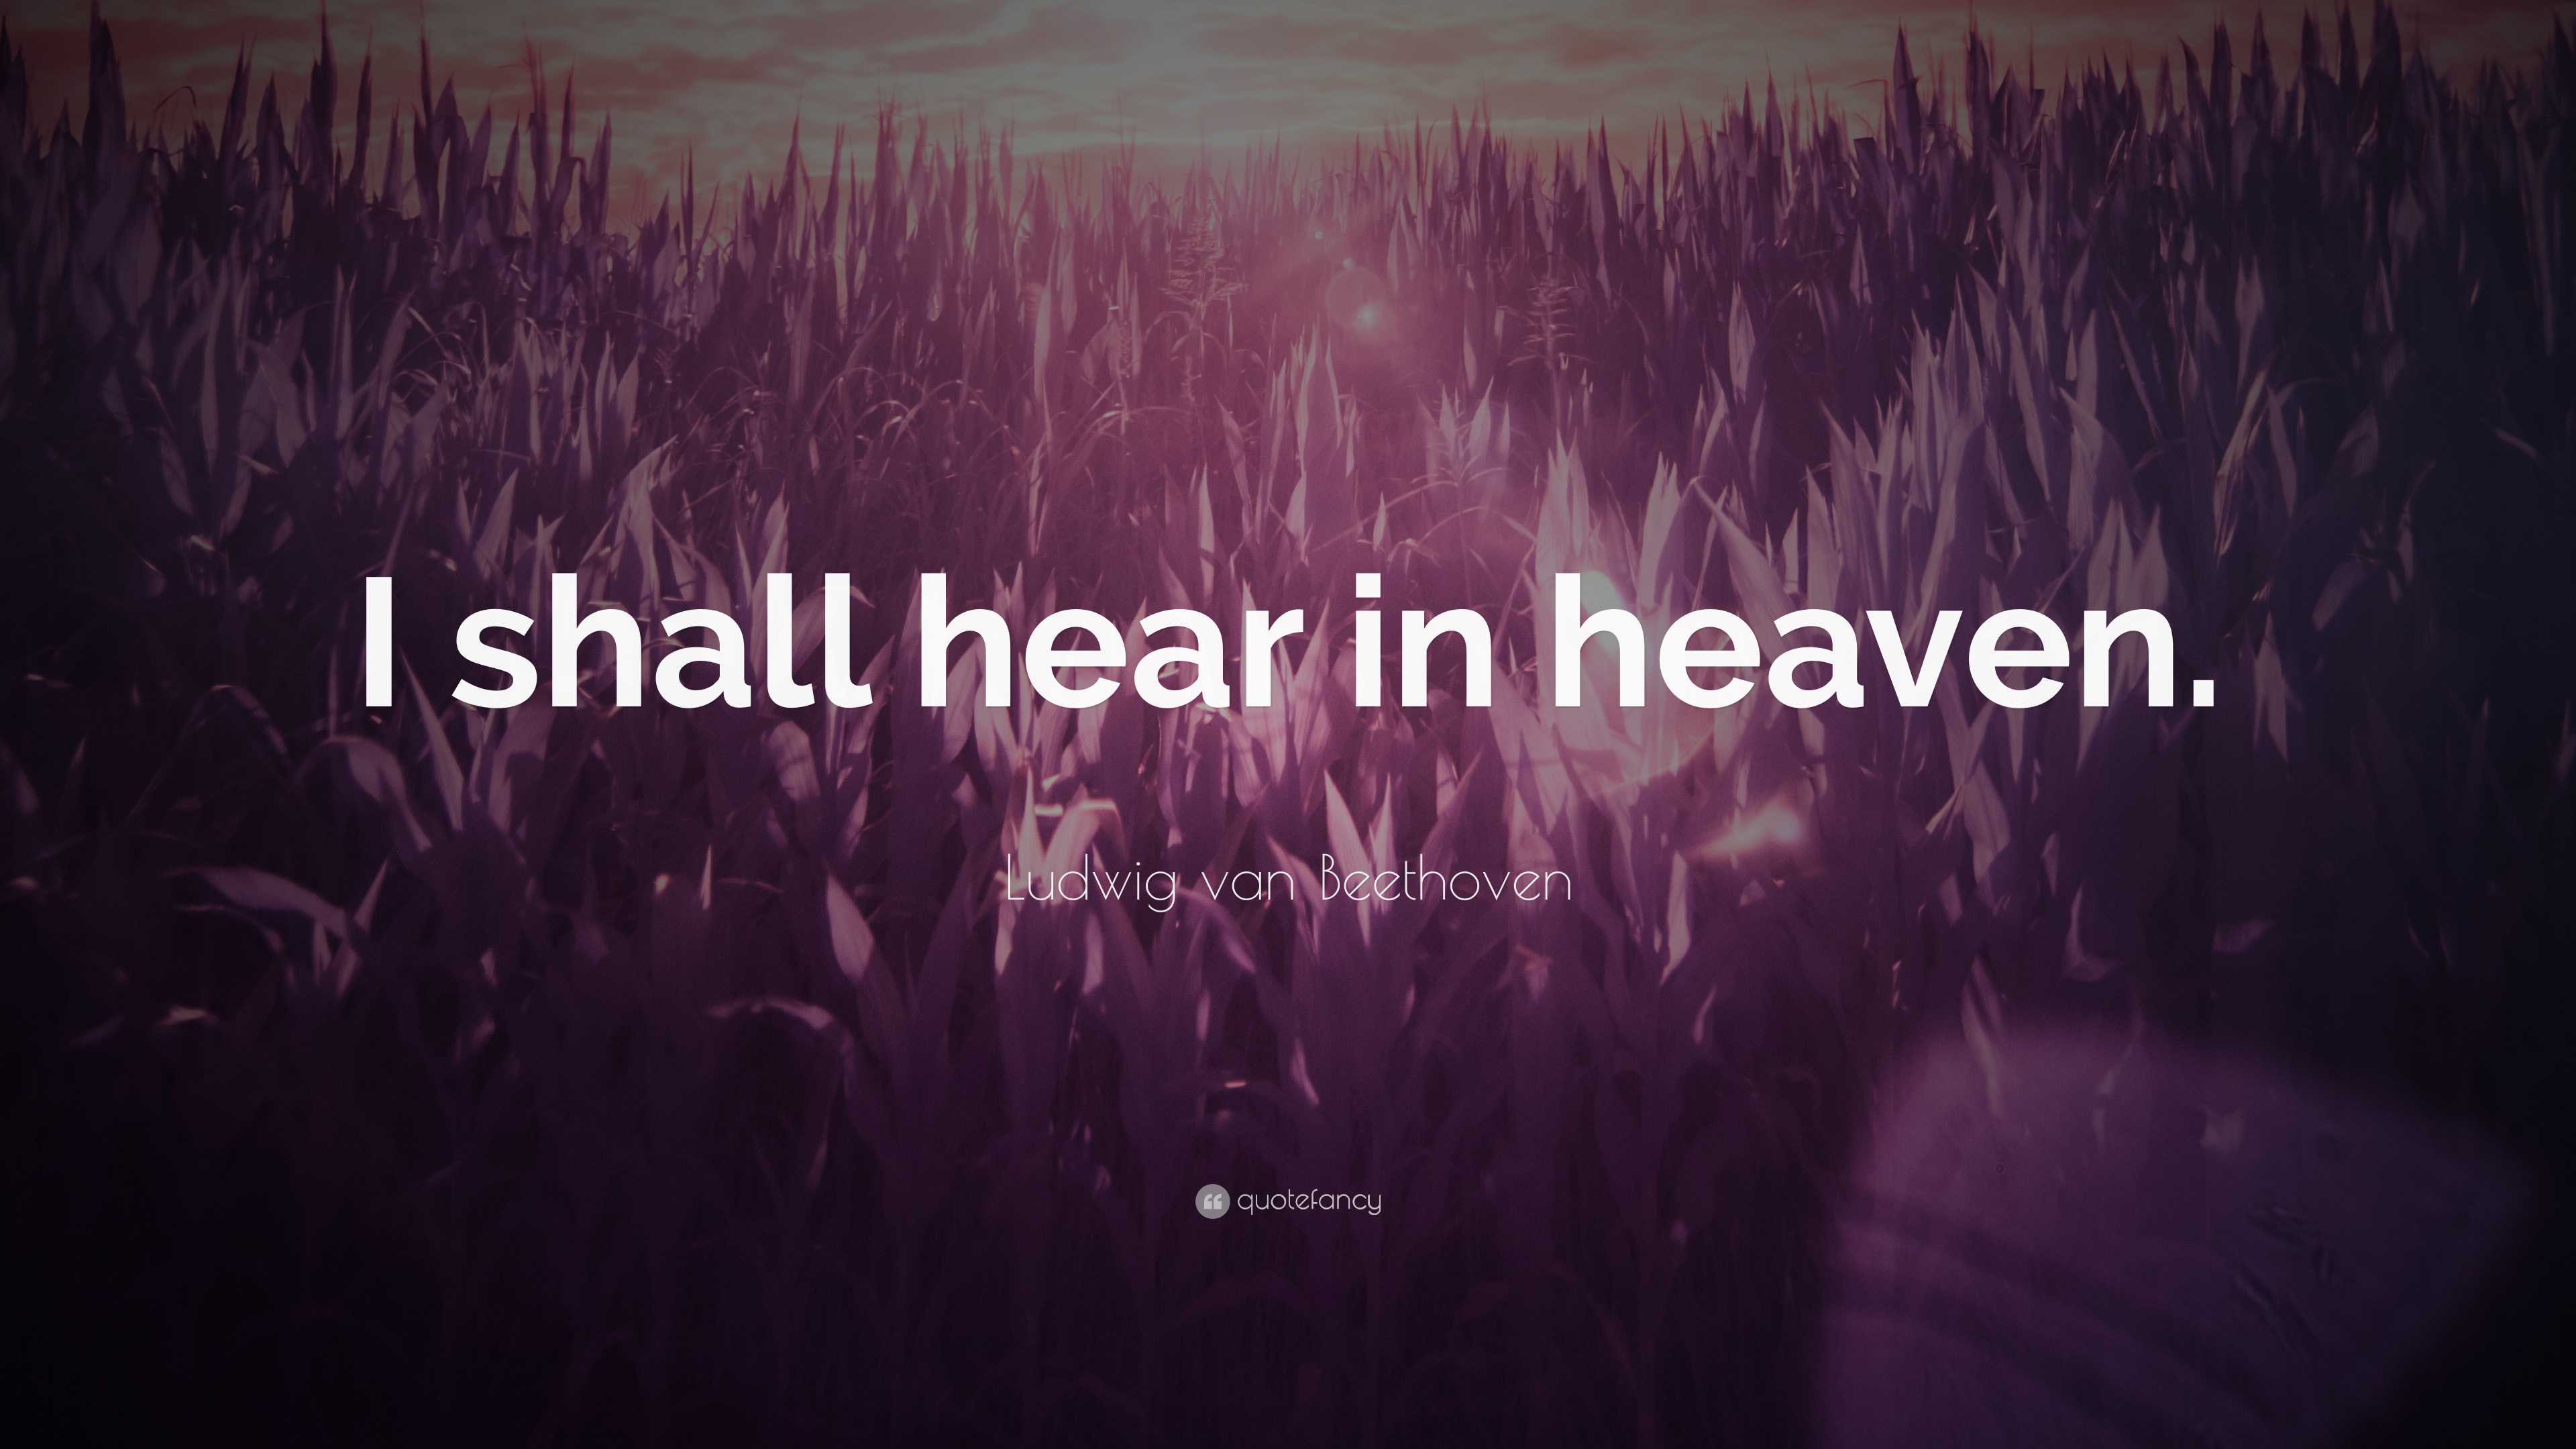 Ludwig van Beethoven Quote: “I shall hear in heaven.” 12 wallpaper